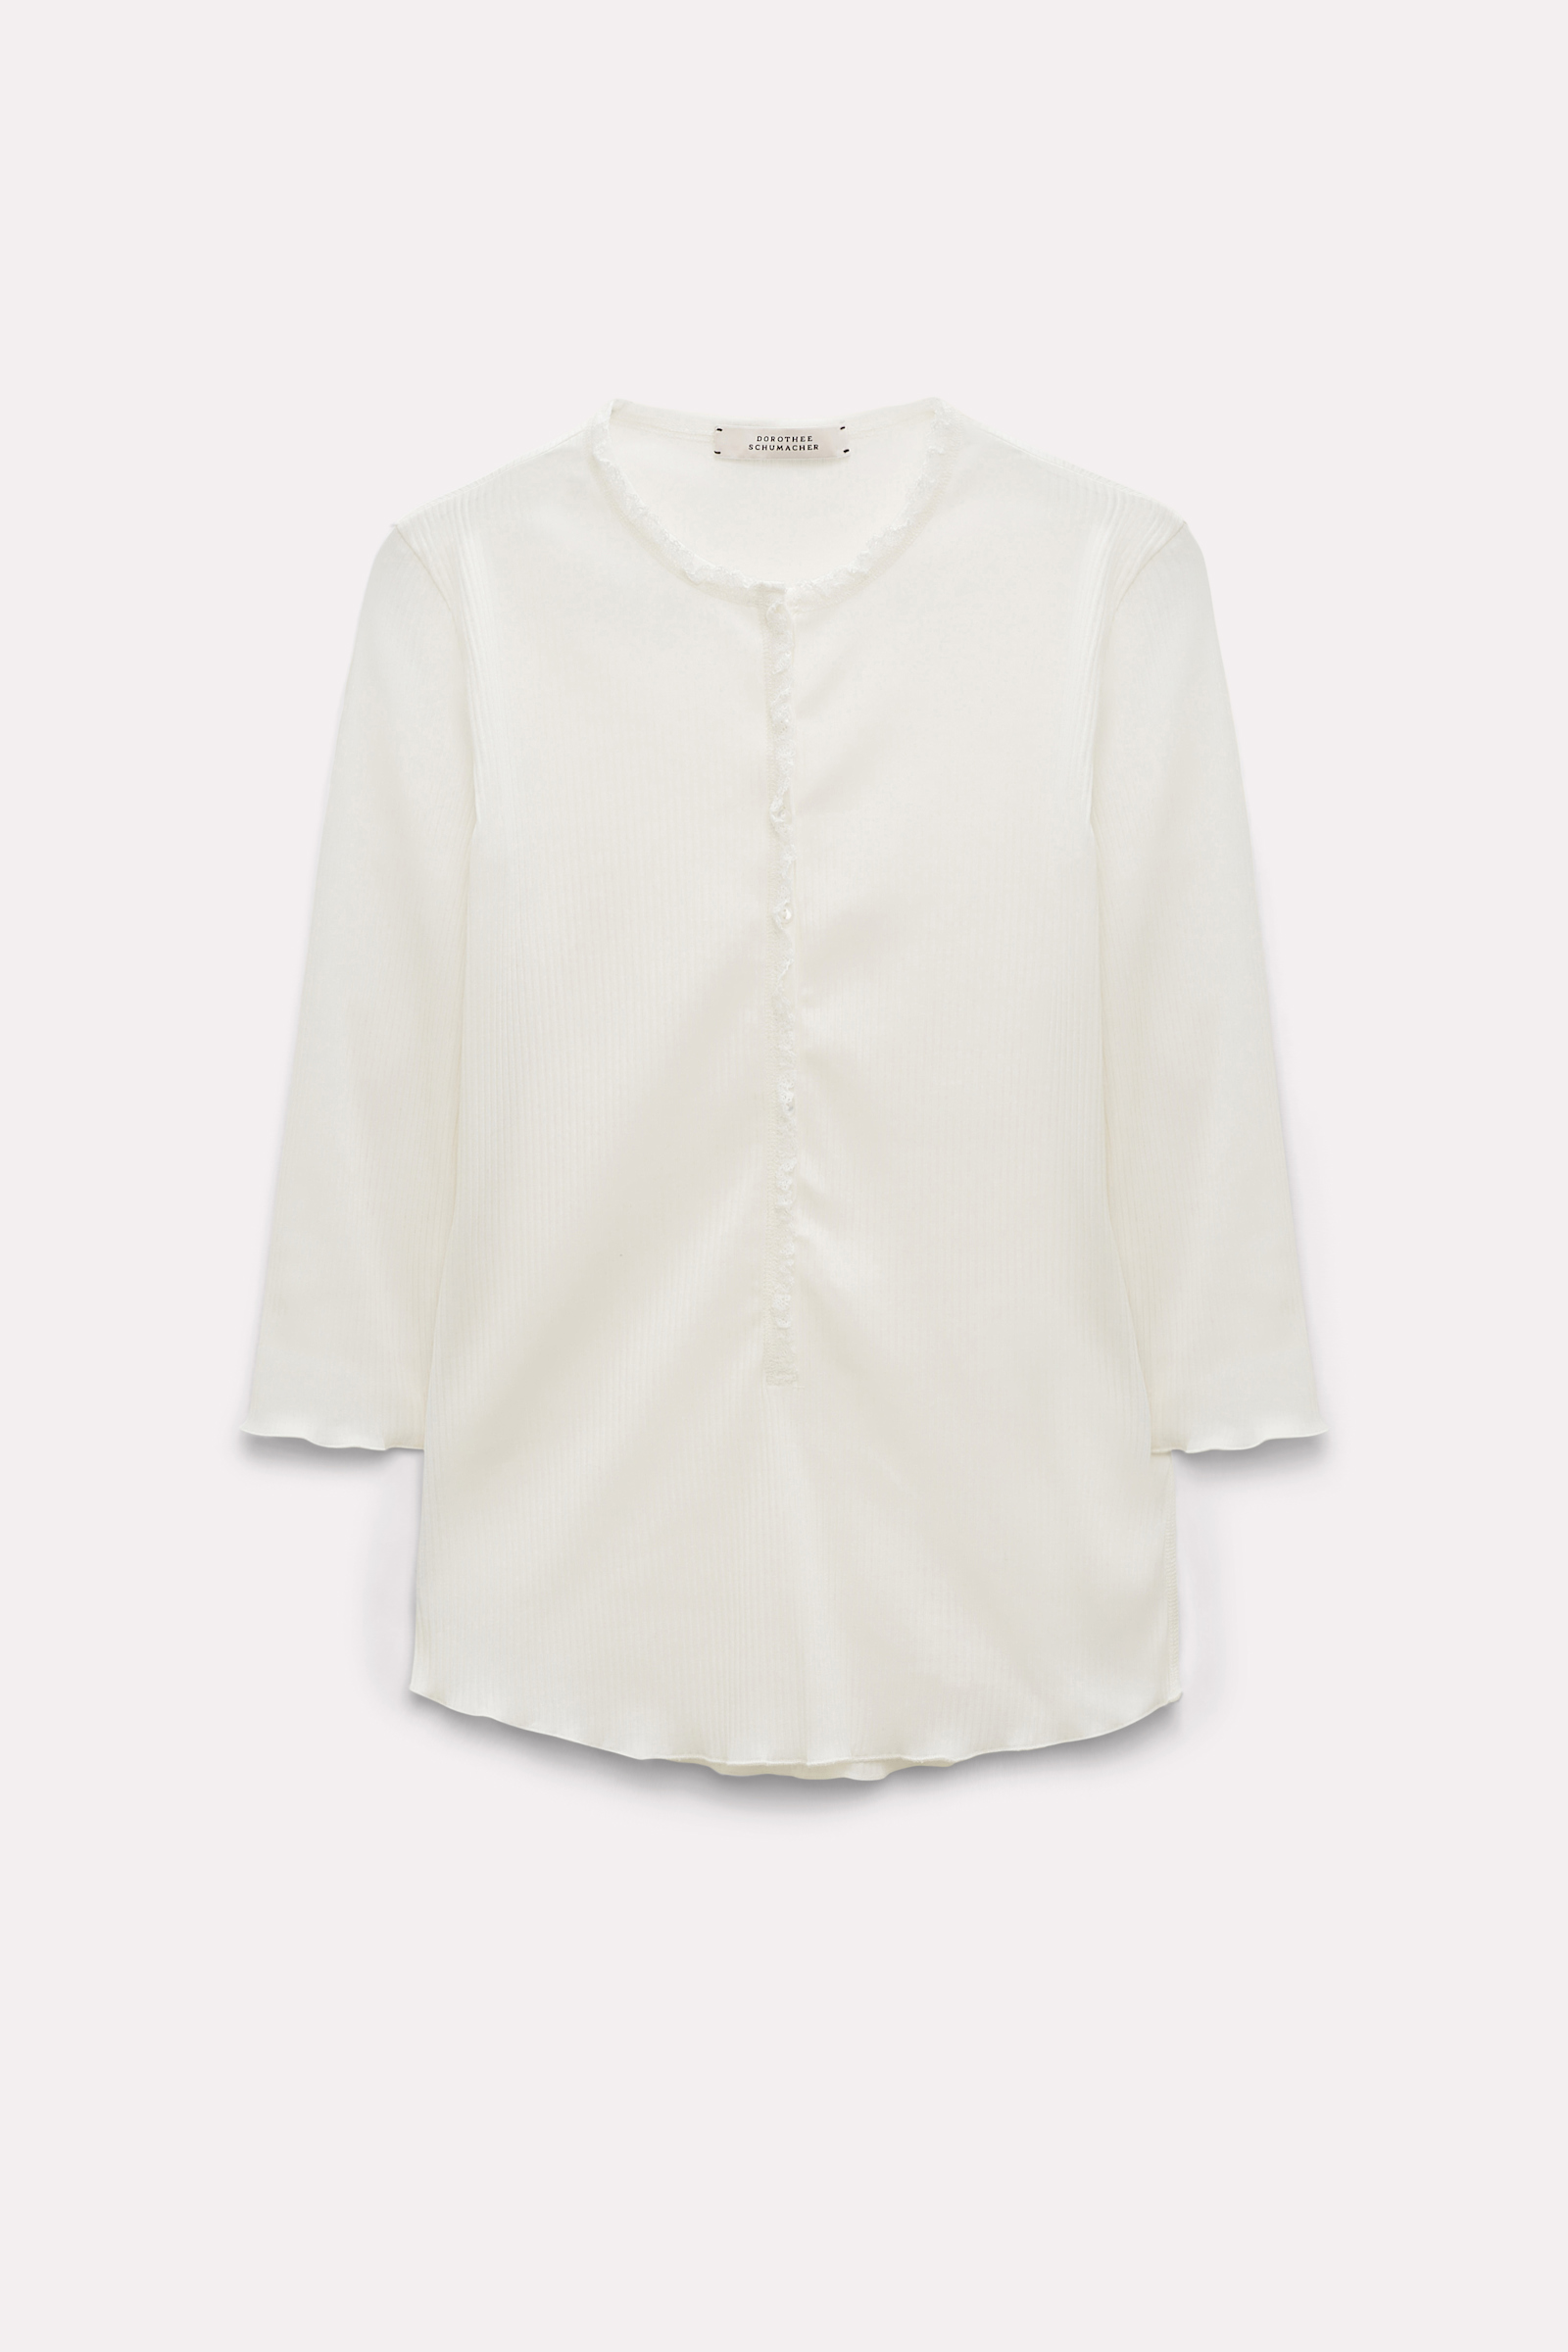 Dorothee Schumacher Ribbed cotton Popover with lace trim camellia white